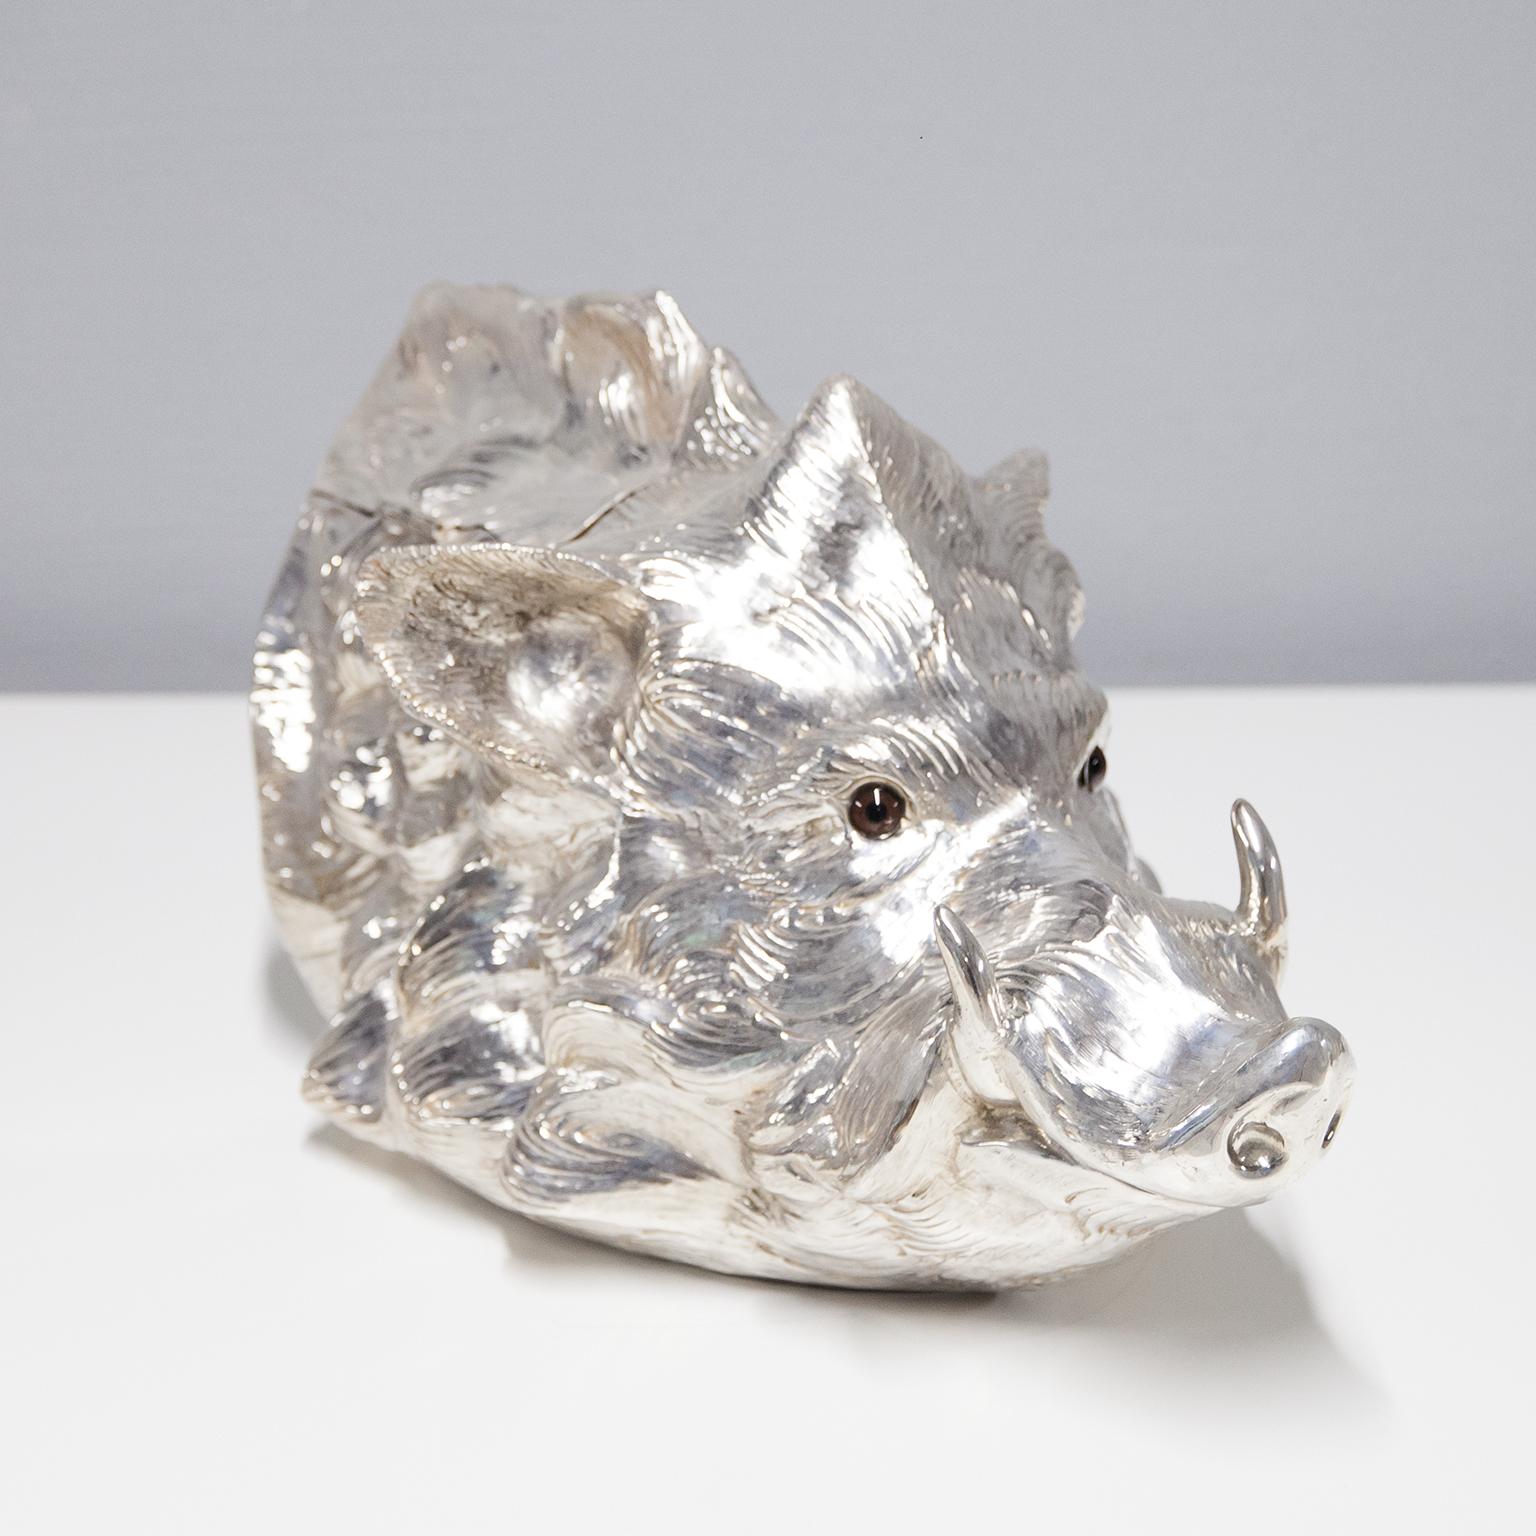 Franco Lapinis exquisite vintage wild boar head sculpture wine cooler is made entirely of metal plated in silver and its surface is lightly textured to give it an organic feel, new plastic inlay inside. Either alone or combined with other pieces by